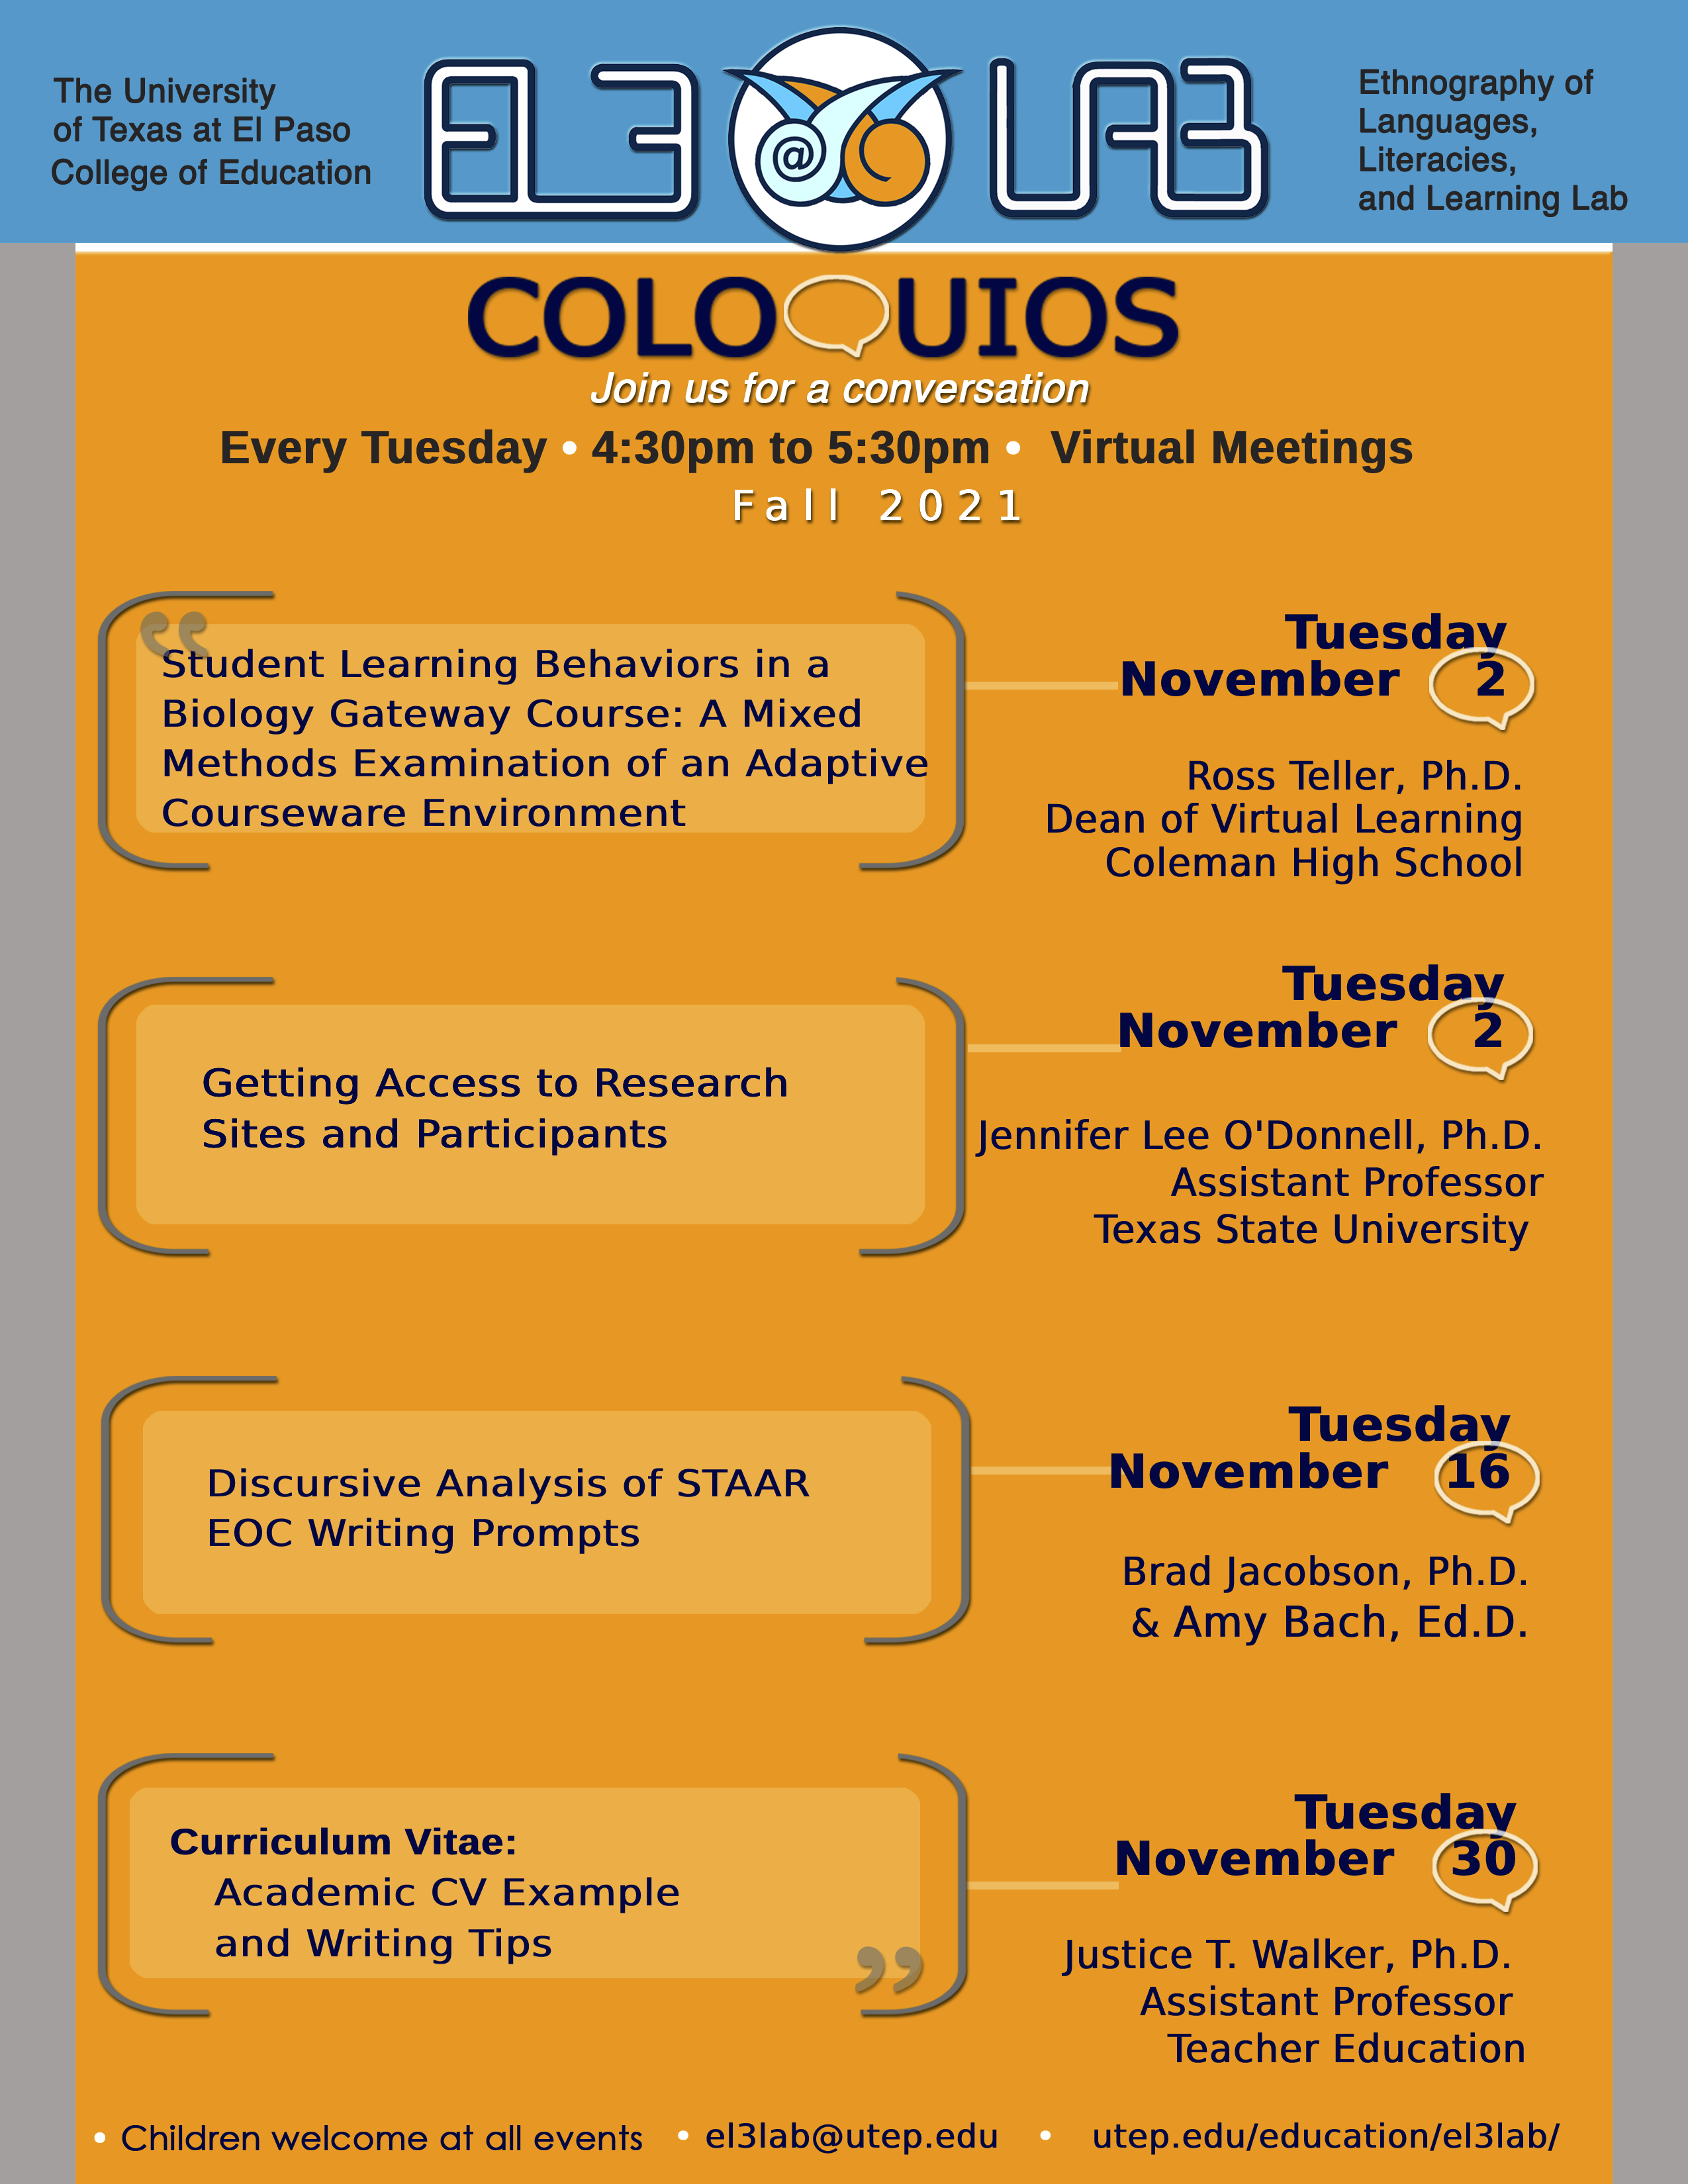 Coloquio-Flyer-Fall-2021-3.png